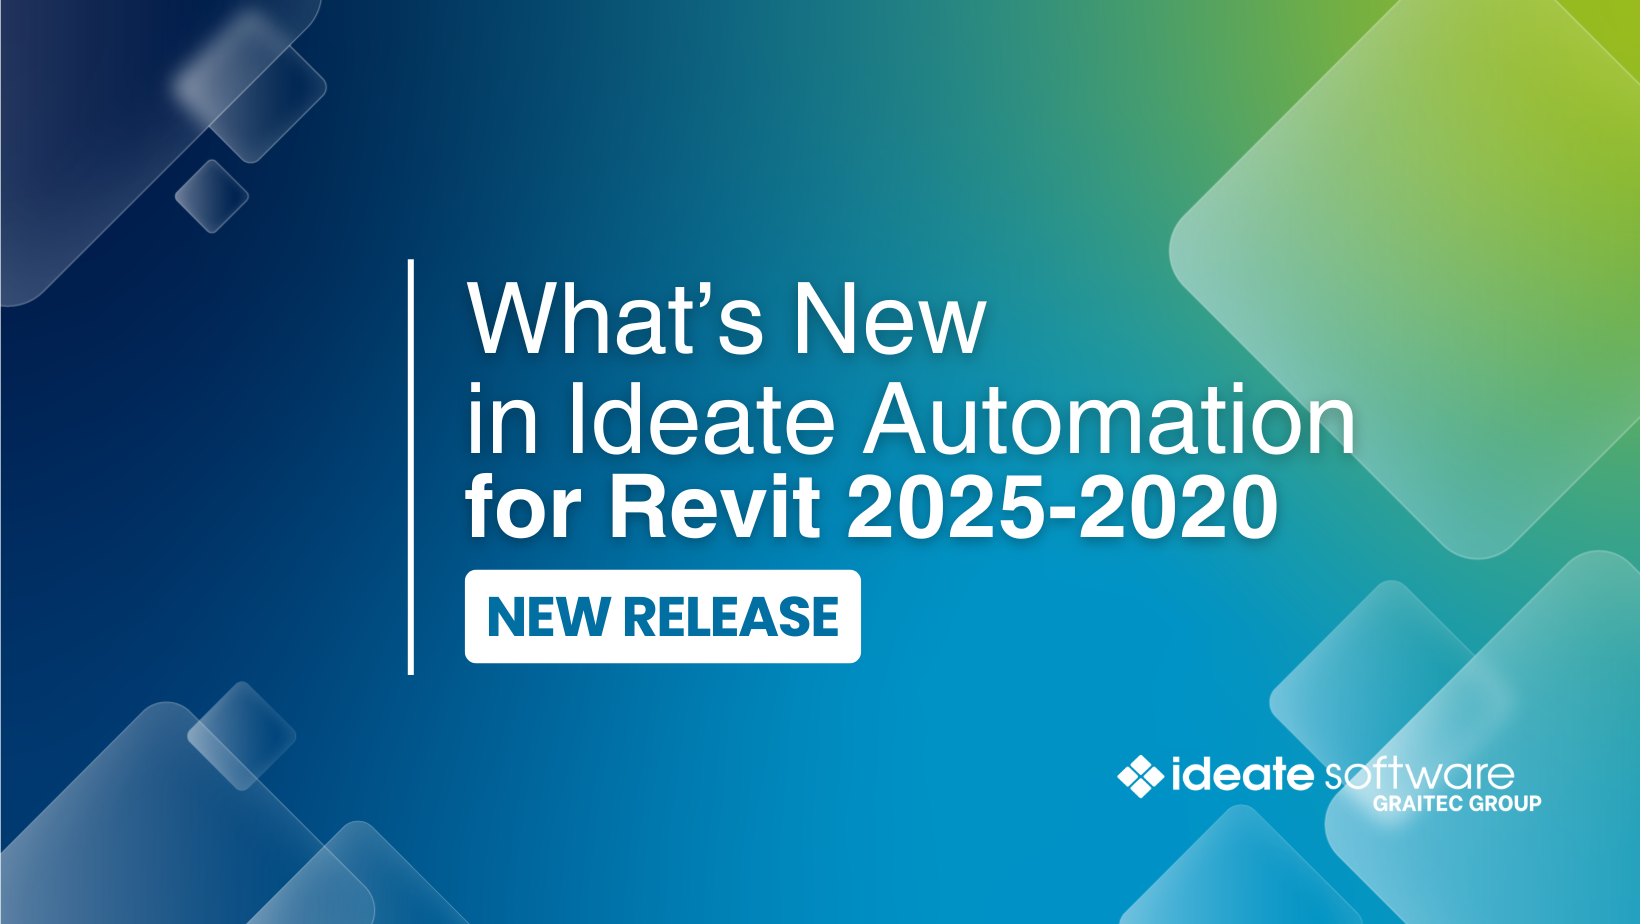 What's New in Ideate Automation